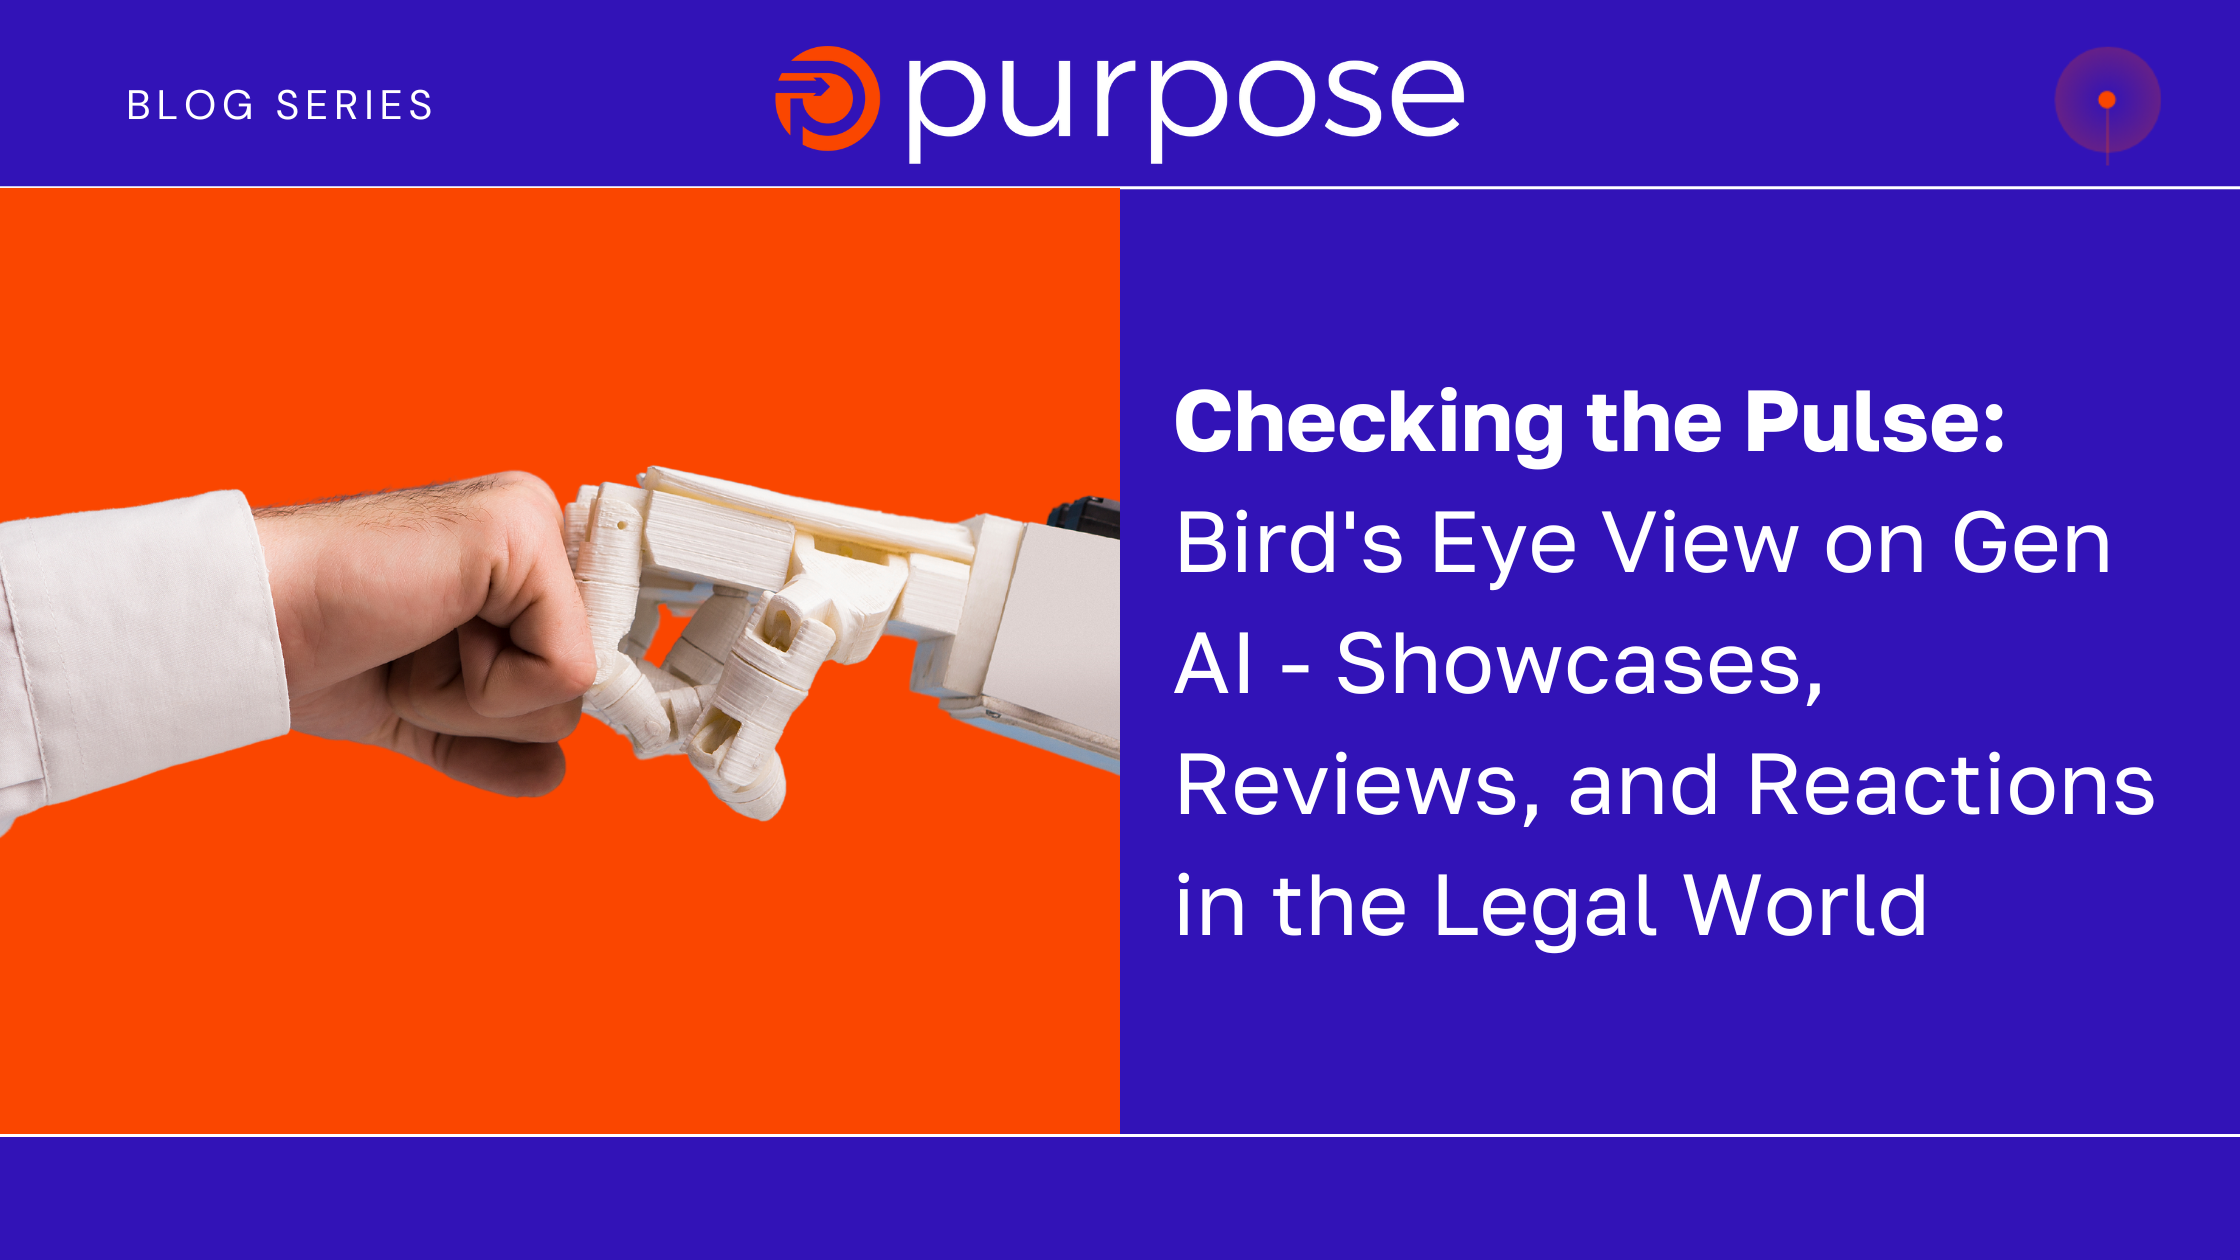 Checking the Pulse: Bird's Eye View on Gen AI - Showcases, Reviews, and Reactions in the Legal World